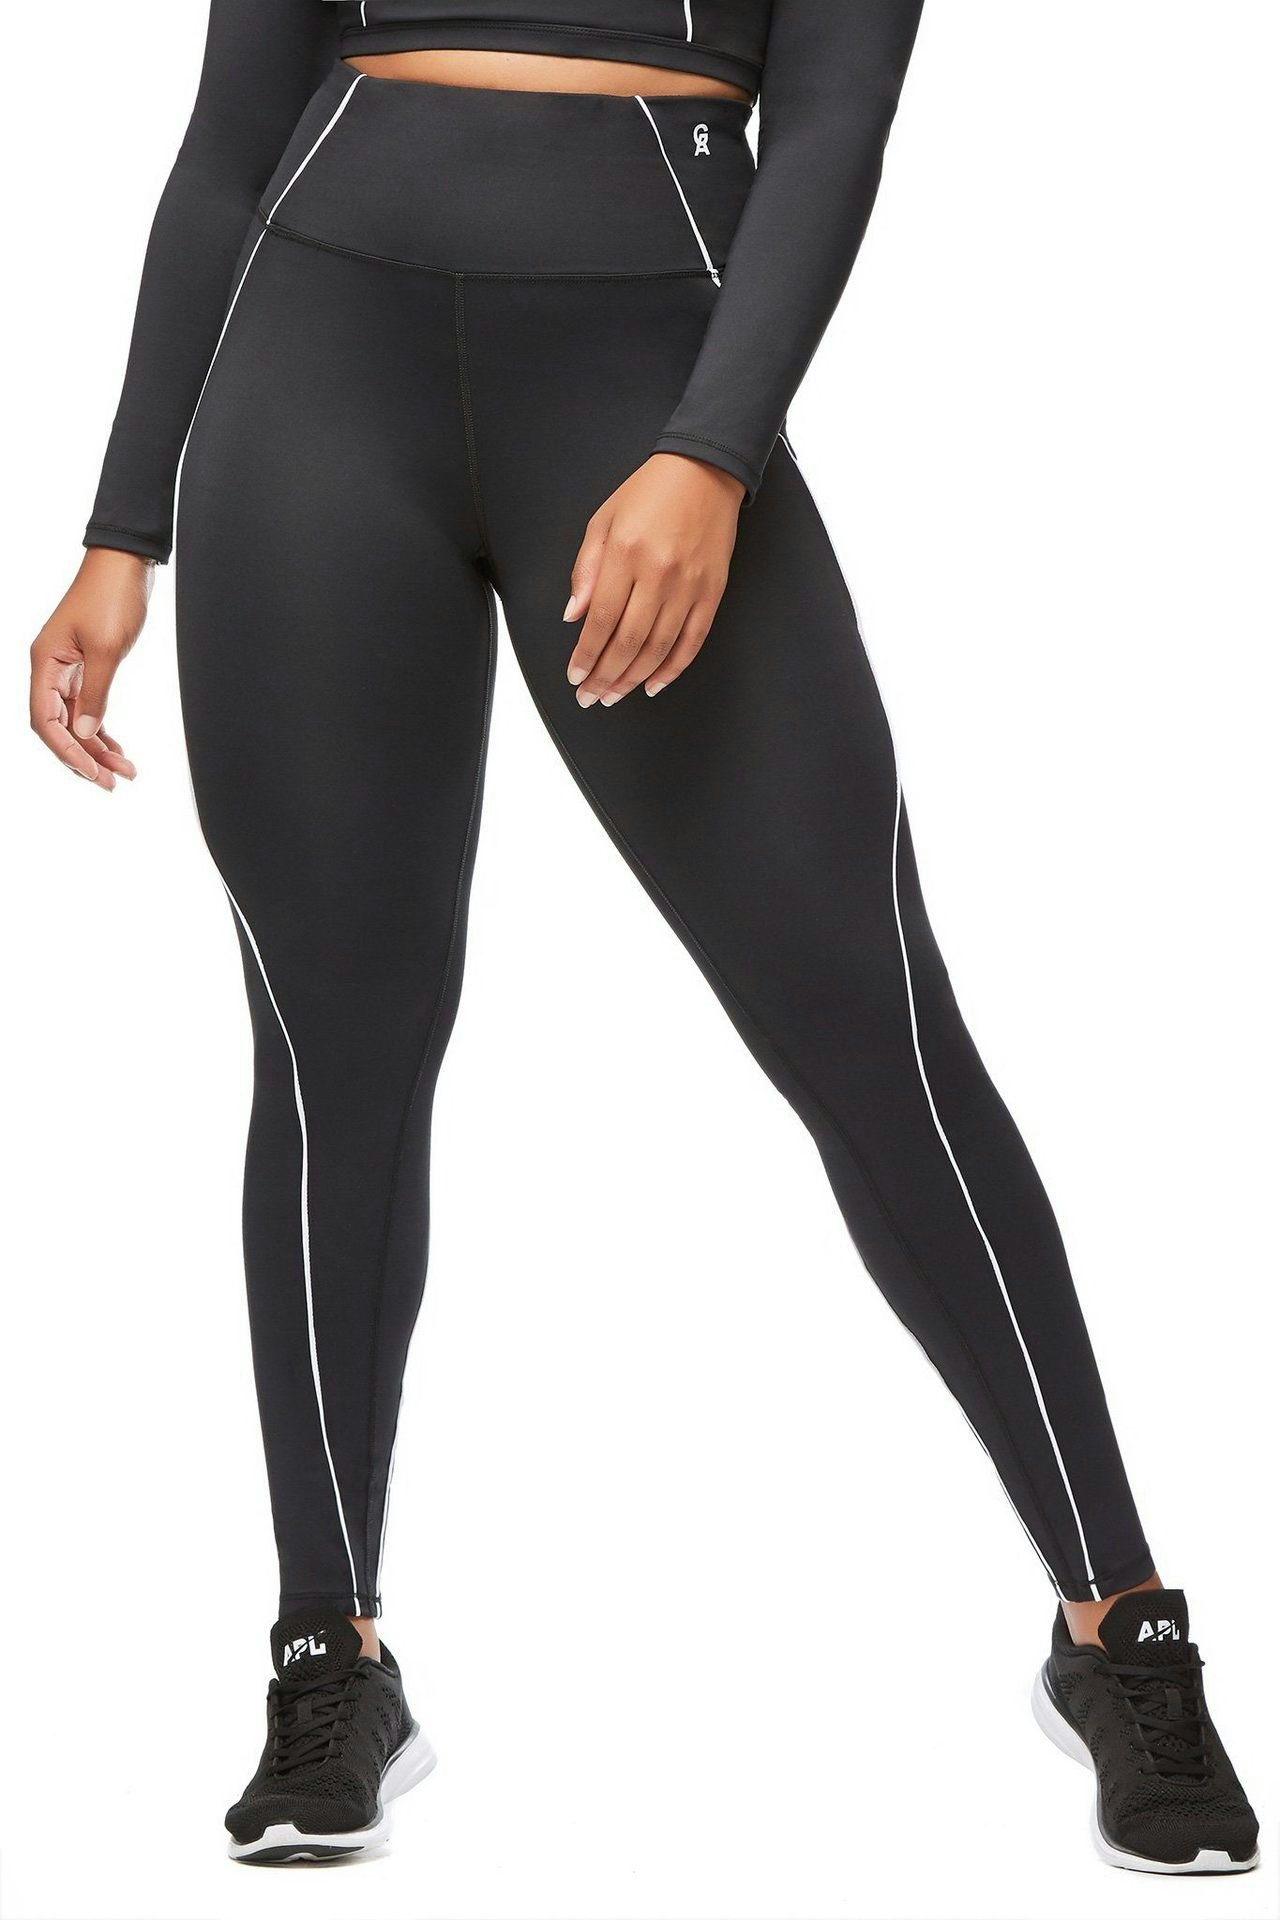 Forge Fit High Waisted Yoga Leggings